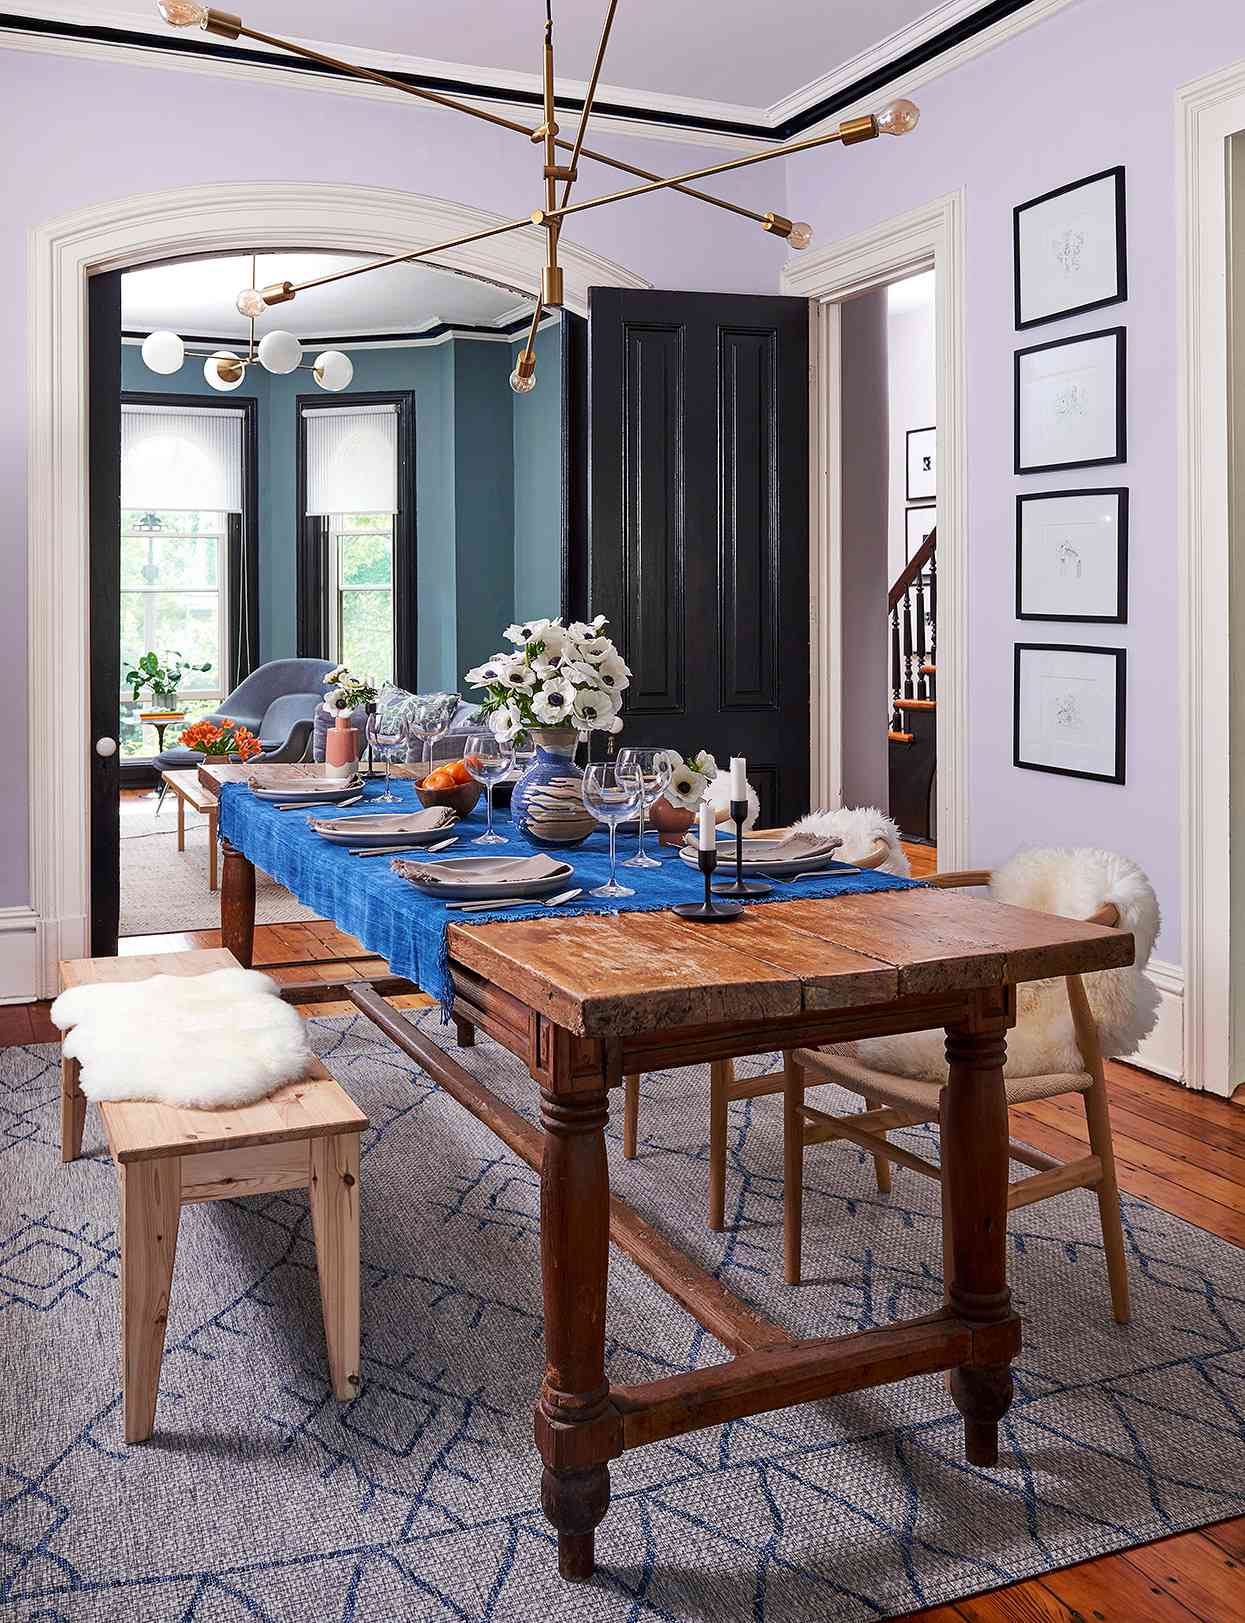 rustic dining table in room with lavender-gray walls